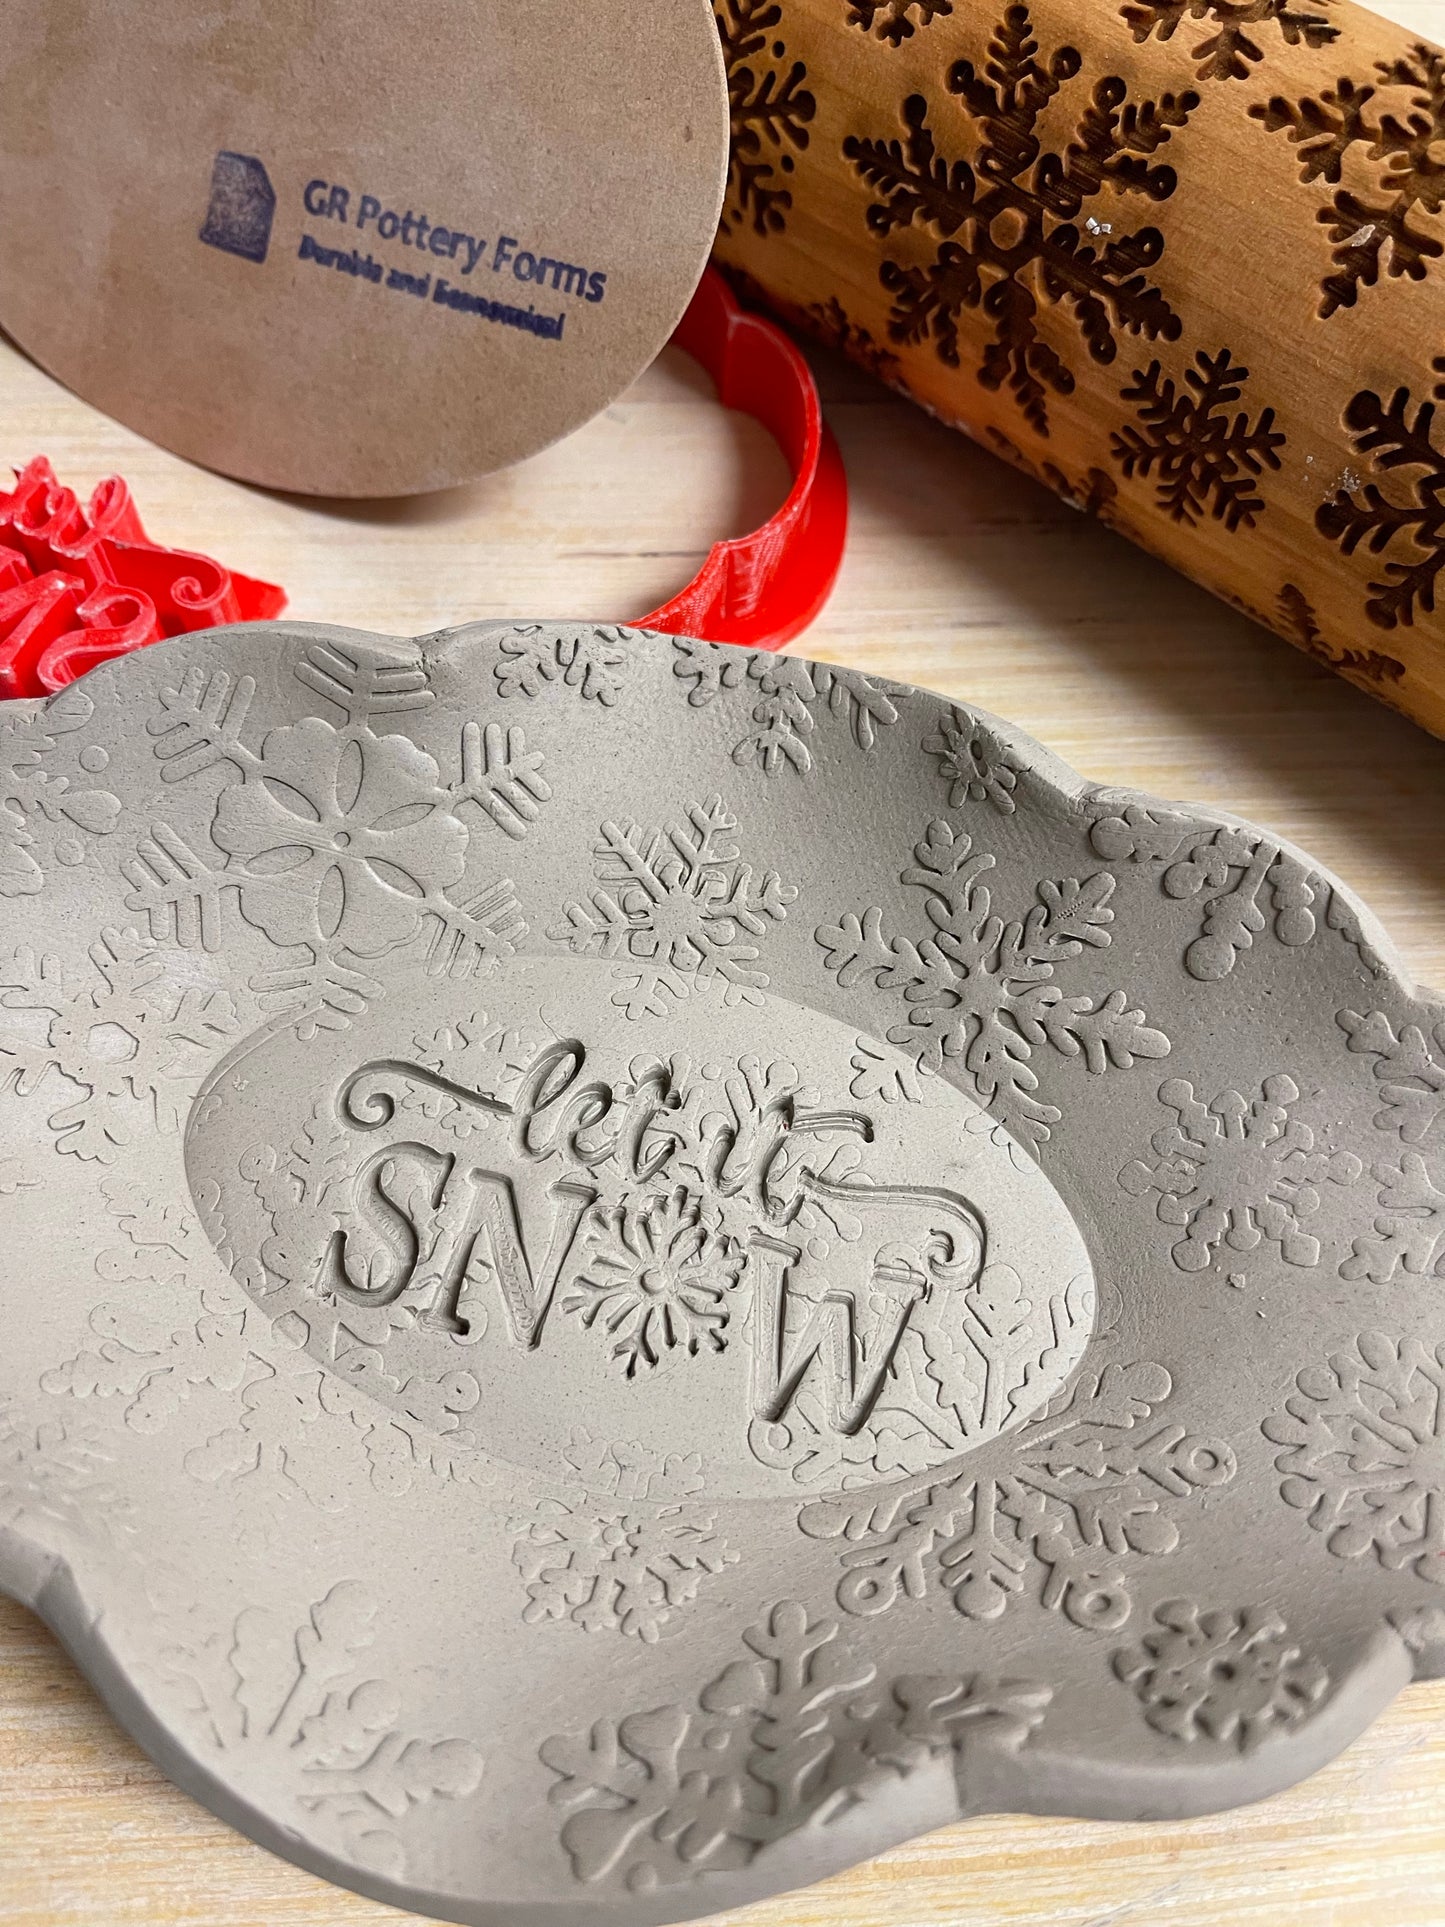 Christmas casual "Let it Snow" word stamp - plastic 3D printed, multiple sizes